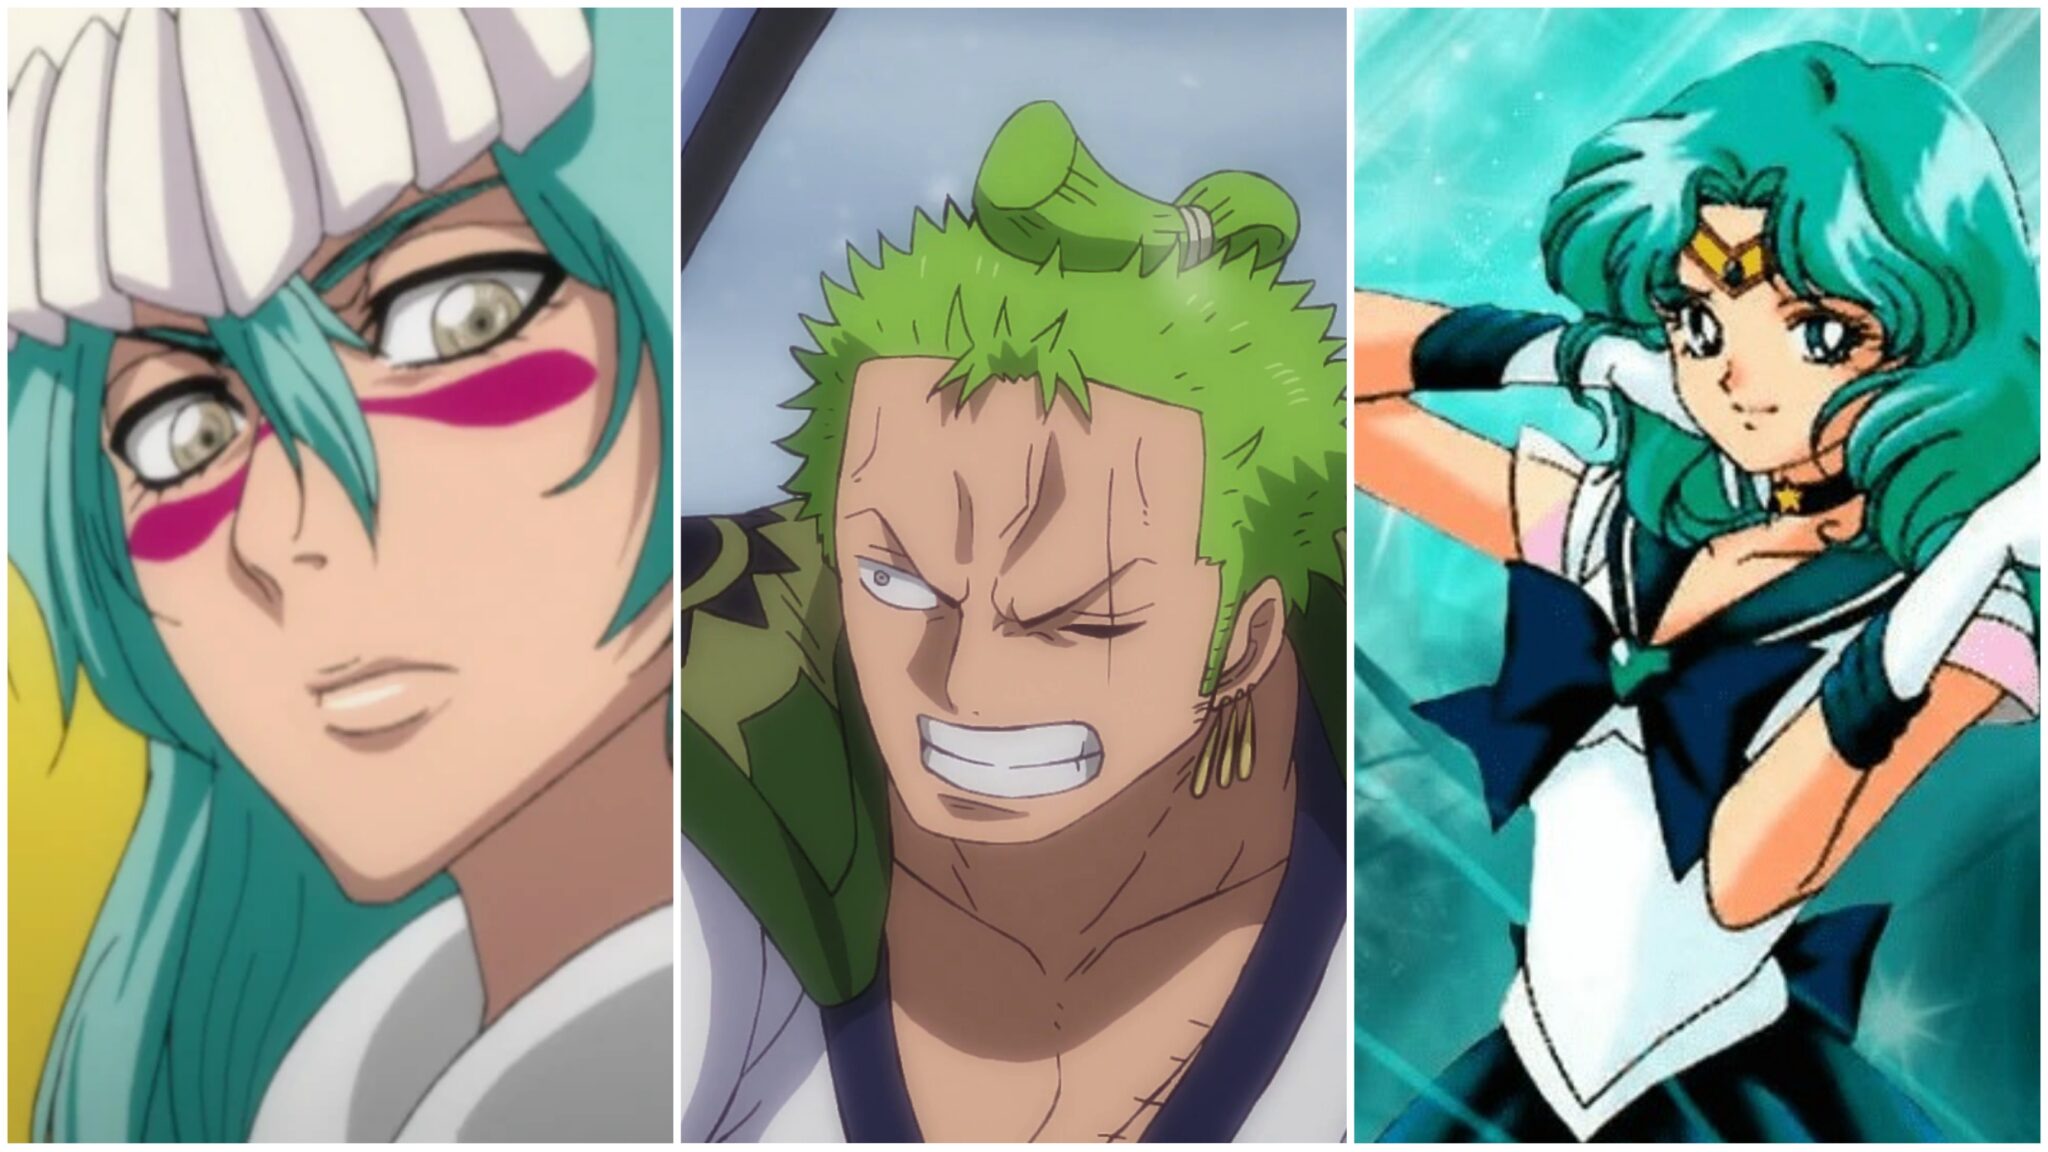 Green Haired Anime Boys with Blue Eyes - wide 1